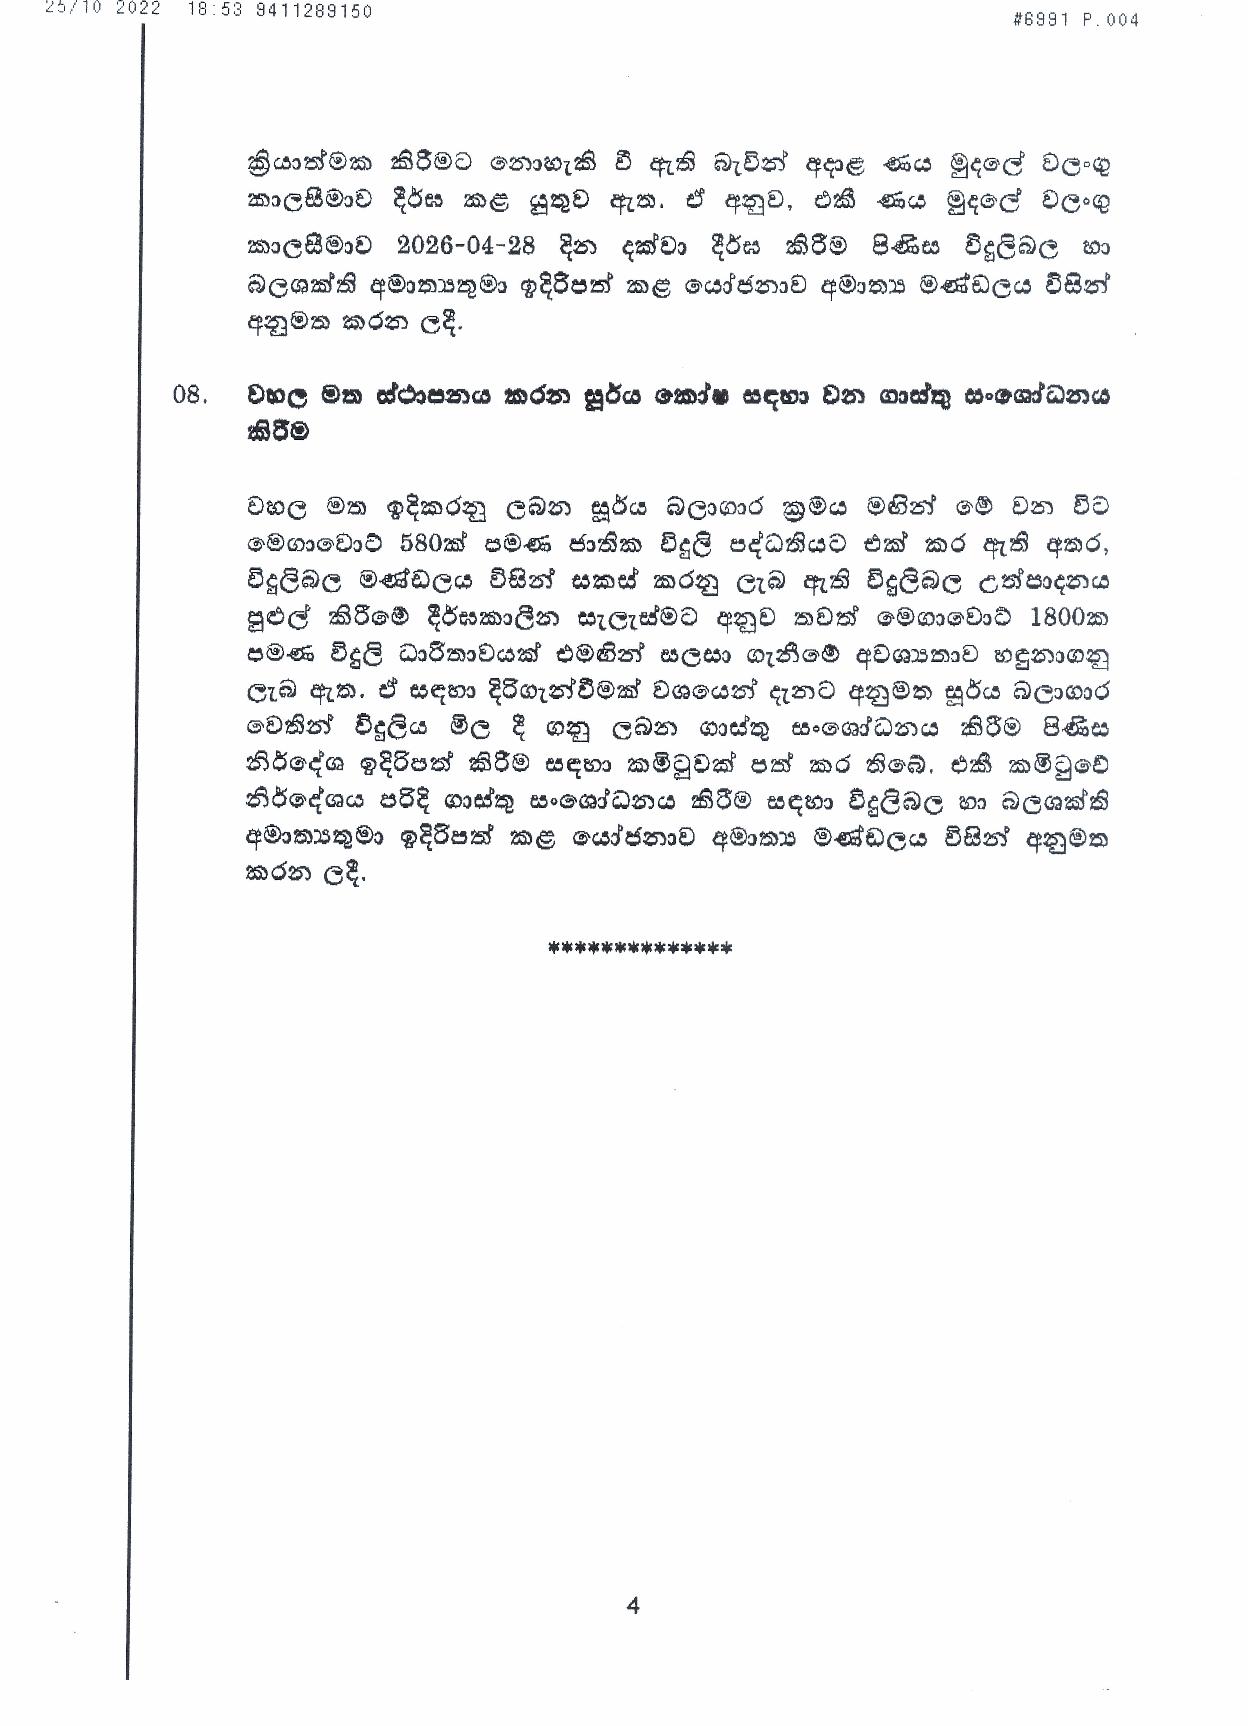 Cabinet Decision on 25.10.2022 page 004